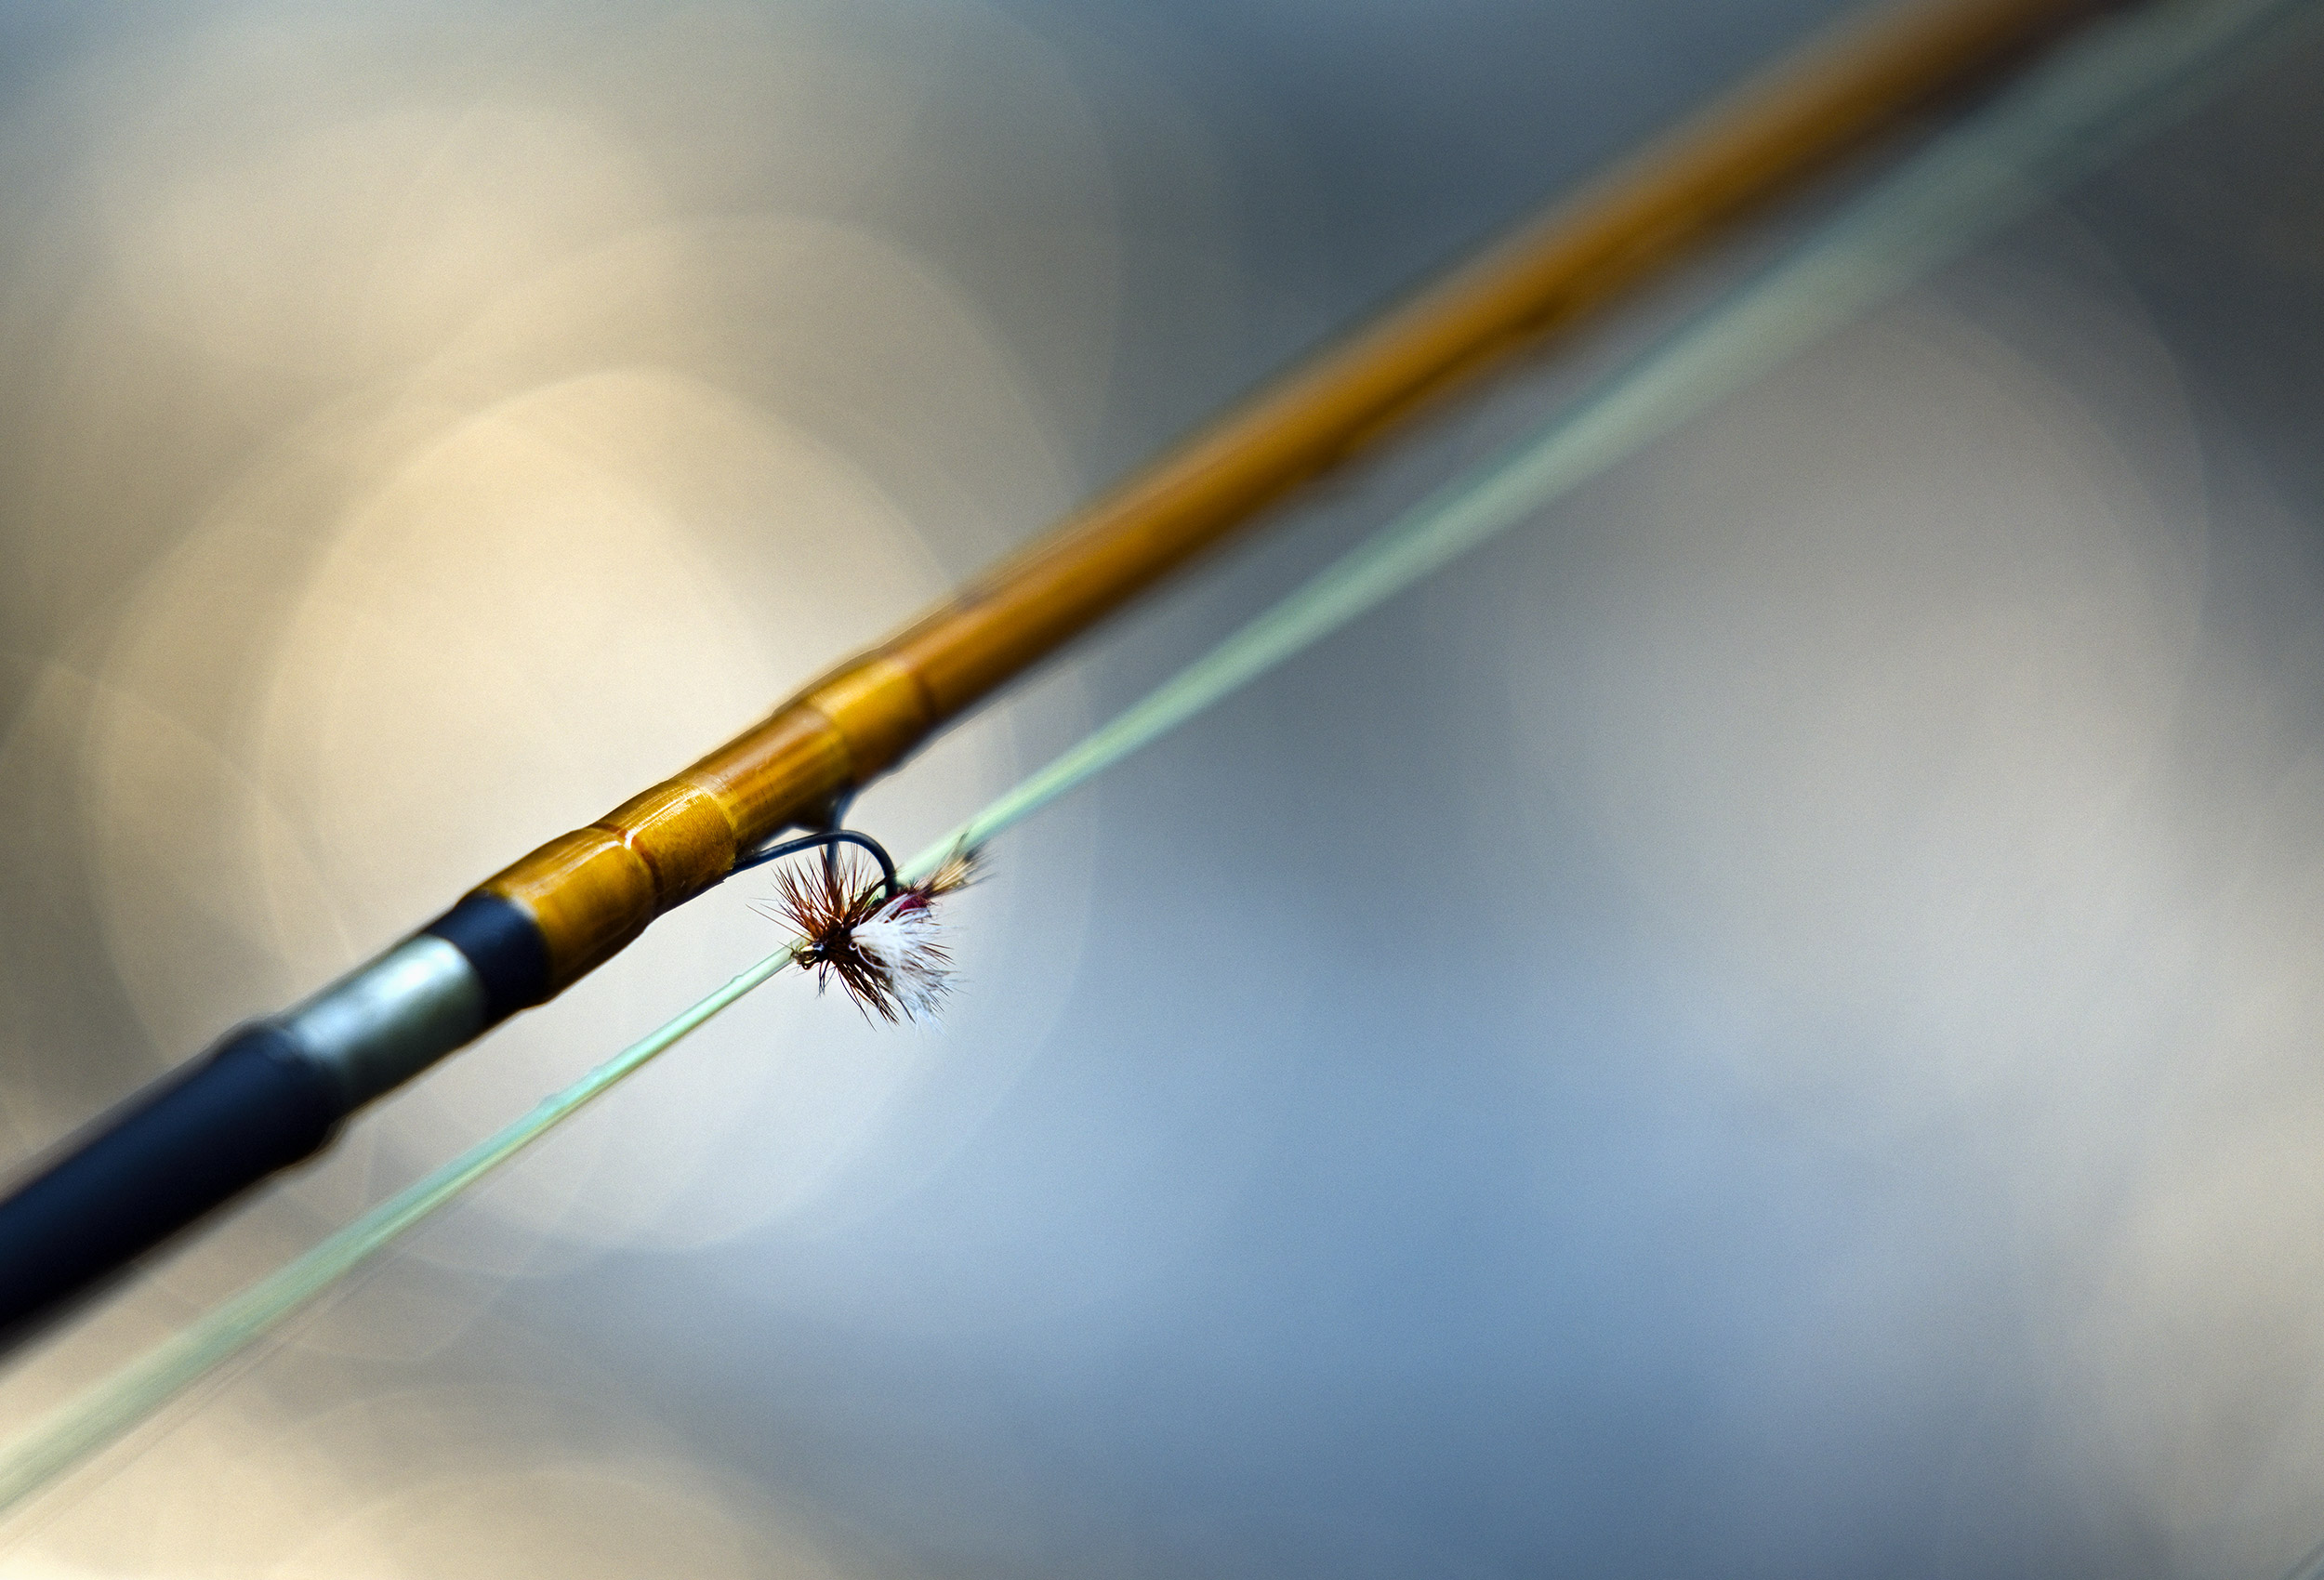 Close up image of a detail of a dry fly attached to a fly rod